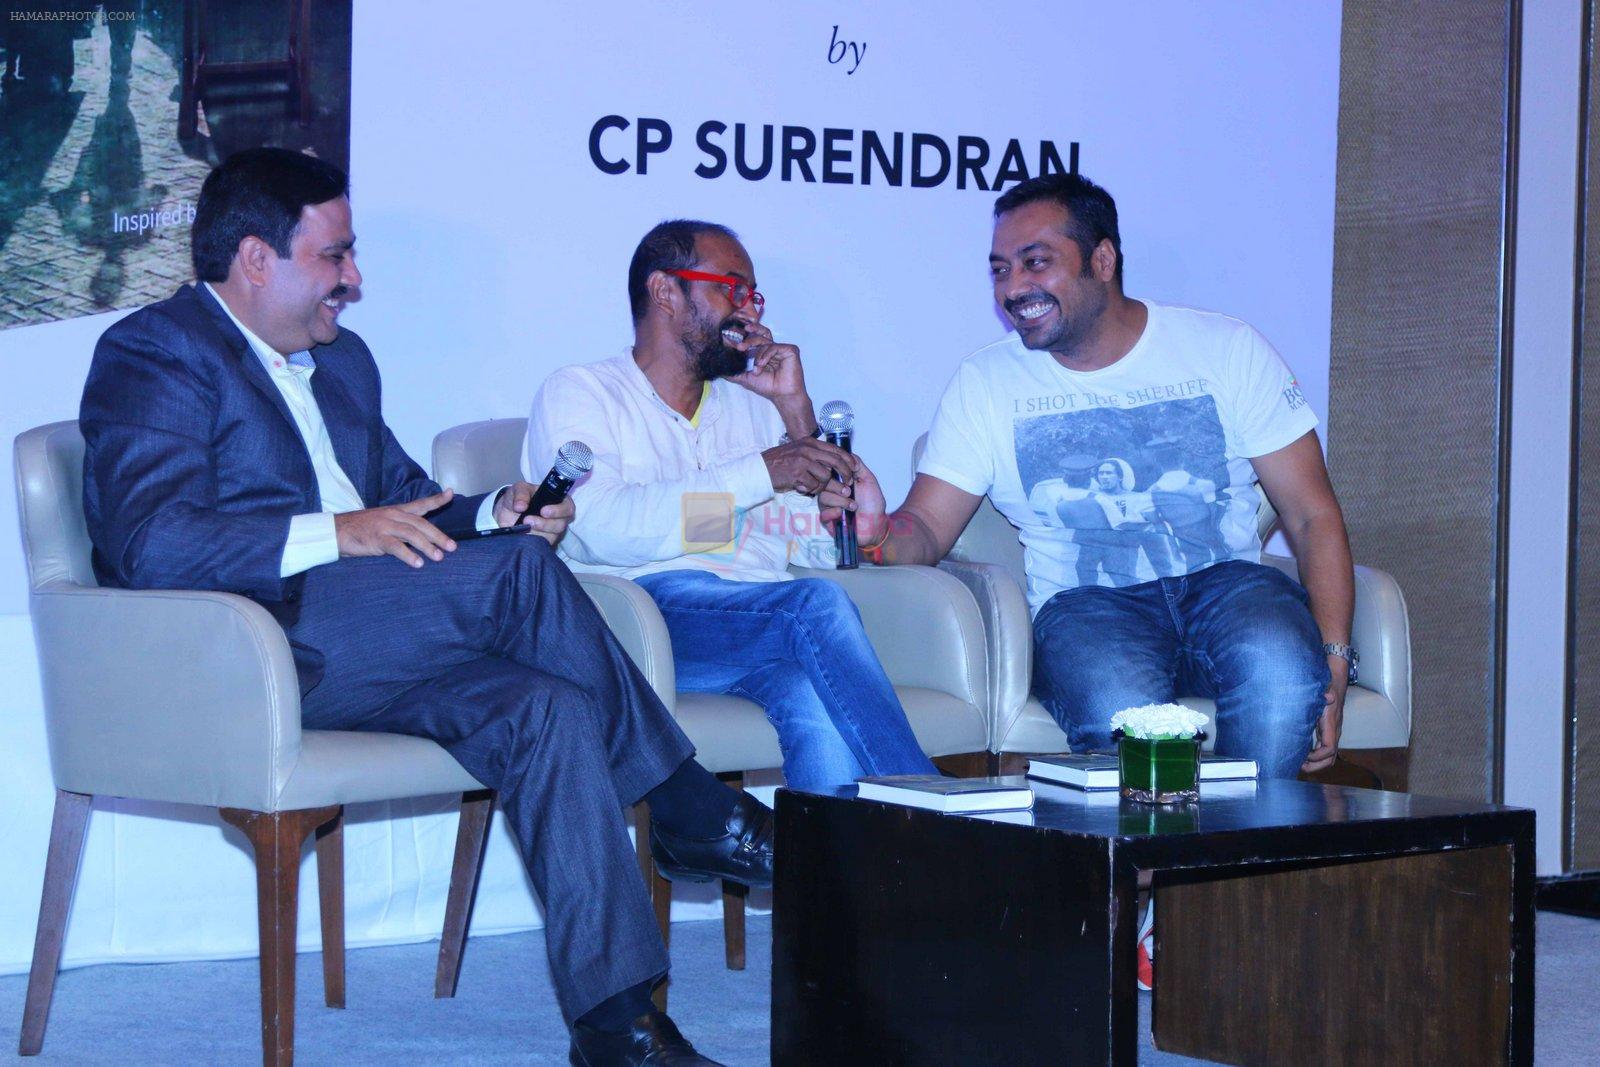 Anurag Kashyap unveils CP Surendran's Book Hadal in Mumbai on 10th April 2015